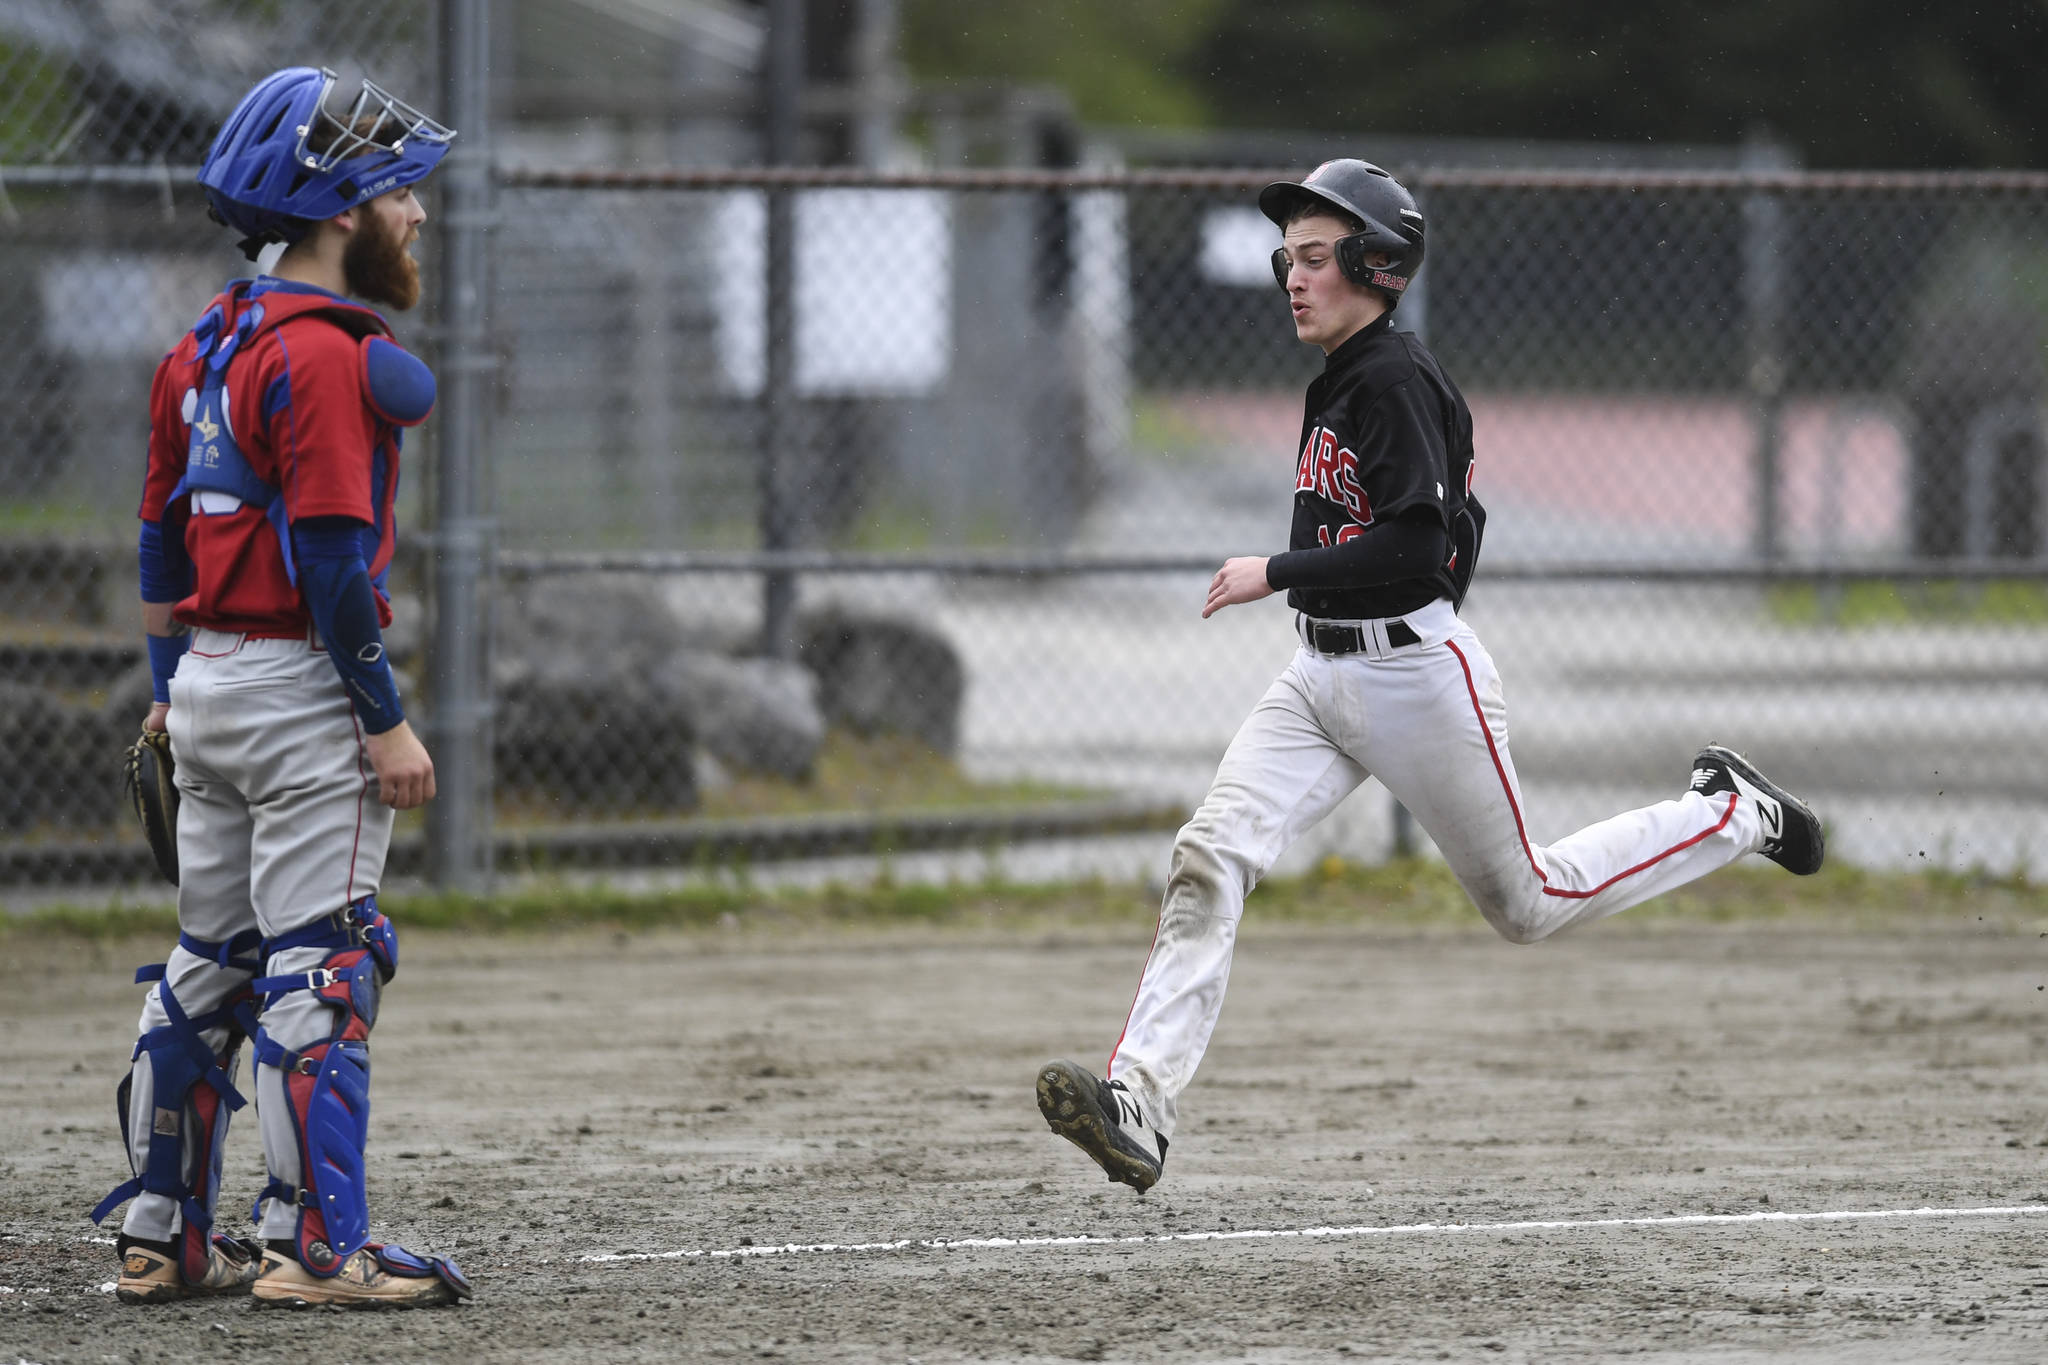 Juneau-Douglas’ Carter Walker races for home plate on a double by Luis Mojica in the second inning as Sitka’s catcher Morgan Simic waits for the ball during the Region V Baseball Championship at Adair-Kennedy Memorial Park on Thursday, May 23, 2019. JDHS won 6-5. (Michael Penn | Juneau Empire)